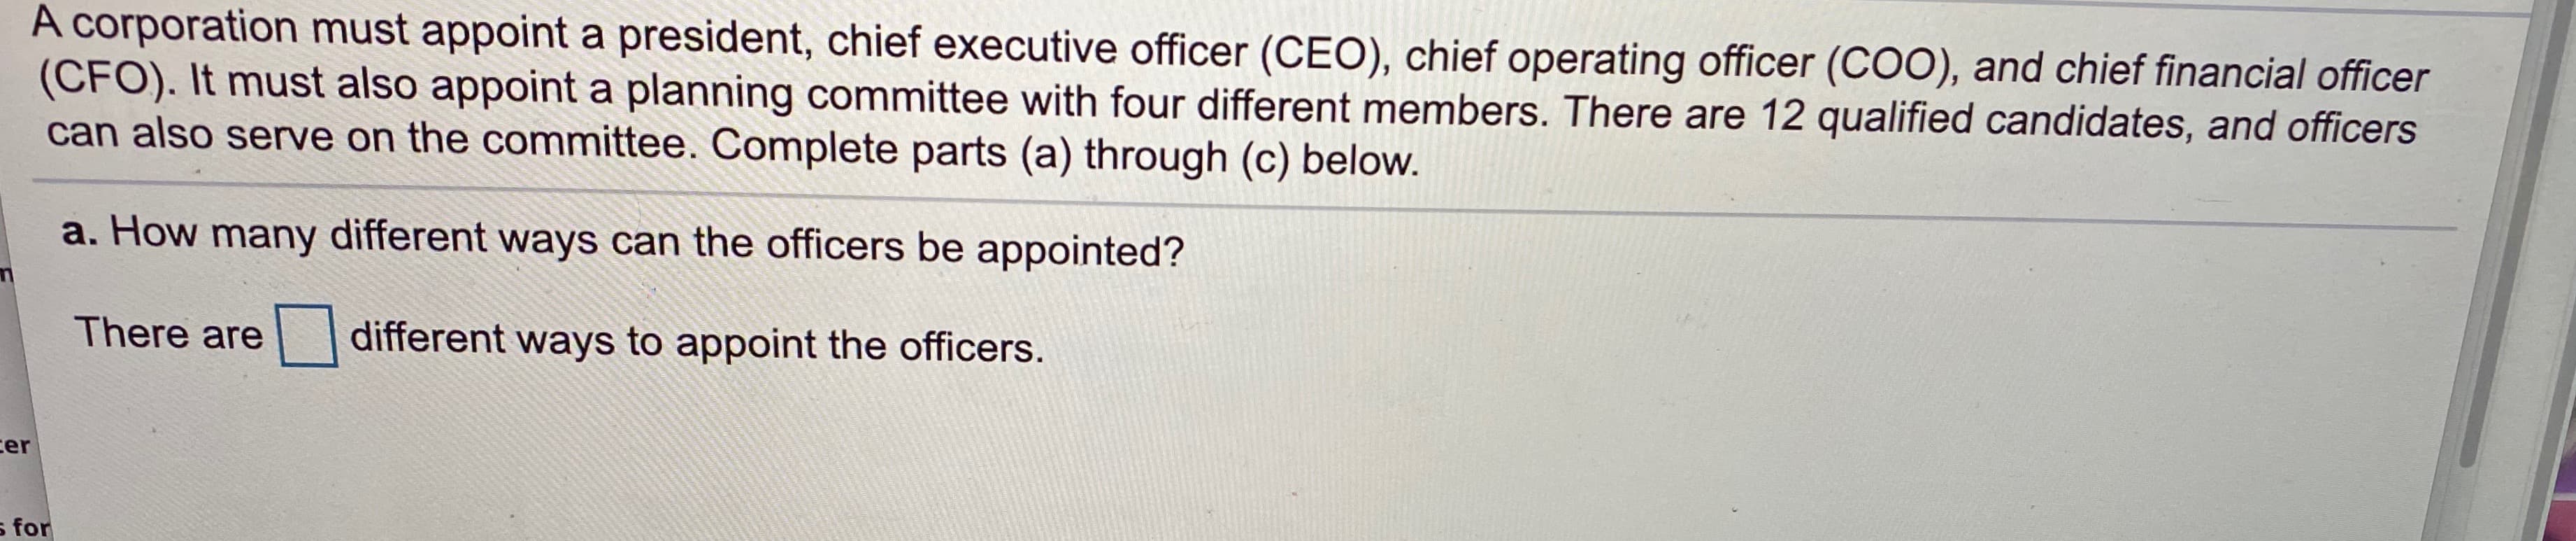 A corporation must appoint a president, chief executive officer (CEO), chief operating officer (COO), and chief financial officer
(CFO). It must also appoint a planning committee with four different members. There are 12 qualified candidates, and officers
can also serve on the committee. Complete parts (a) through (c) below.
a. How many different ways can the officers be appointed?
There are
different ways to appoint the officers.
ter
for
